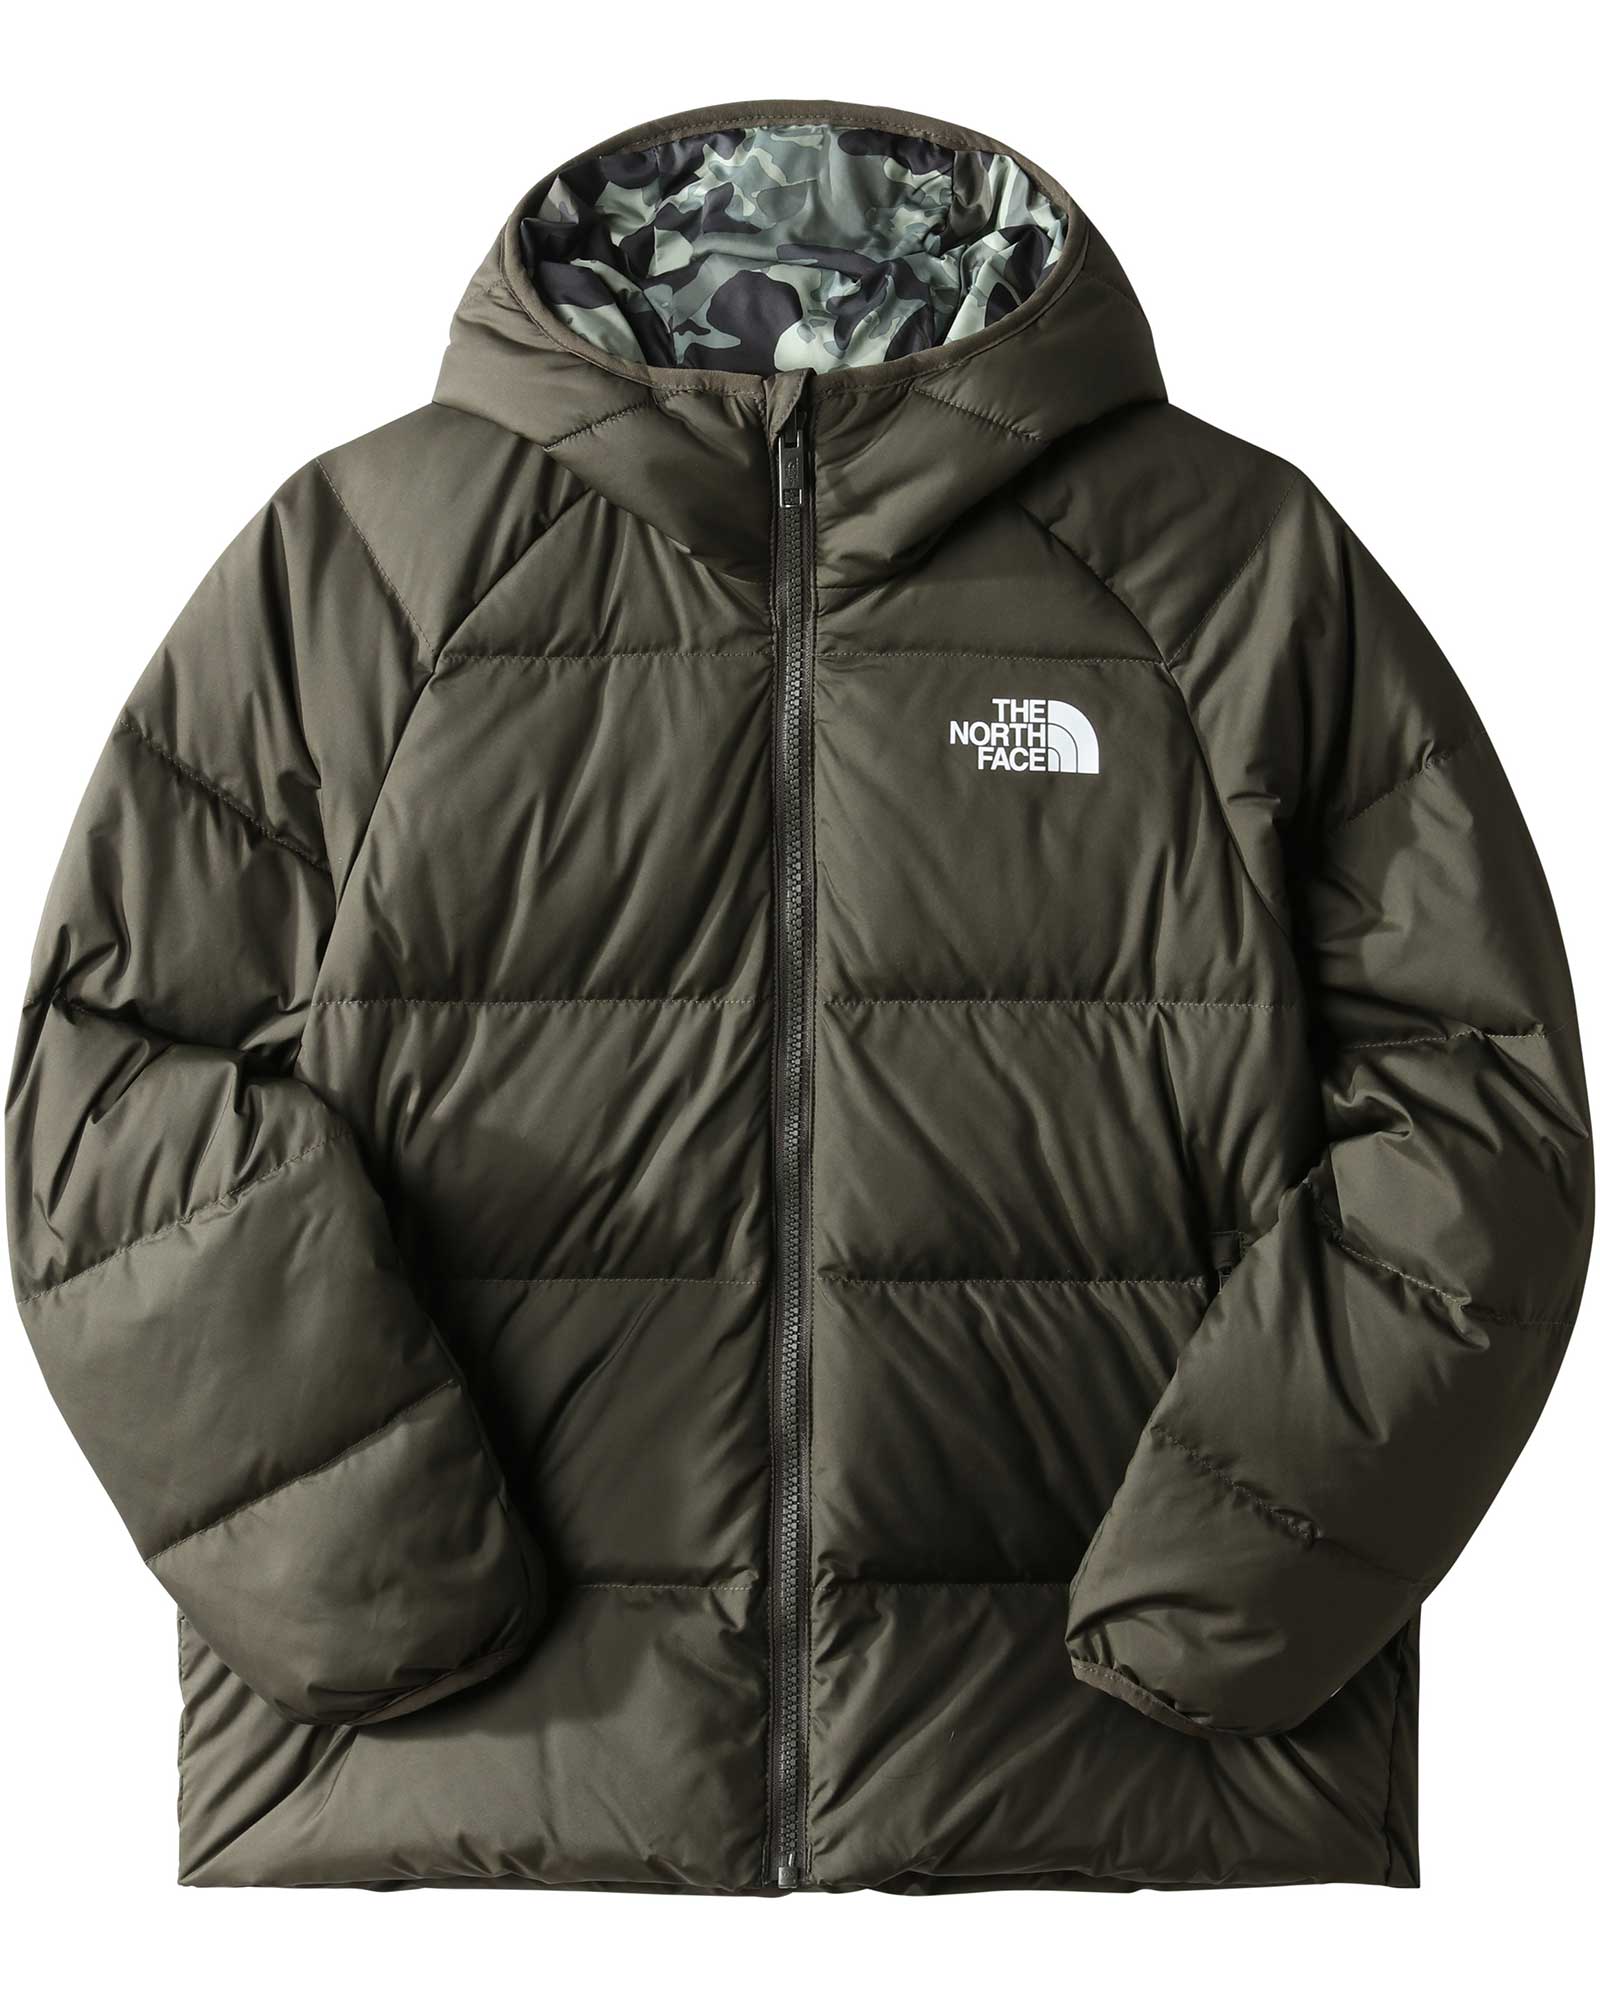 The North Face Print North Kids’ Down Hooded Jacket - New Taupe Green S